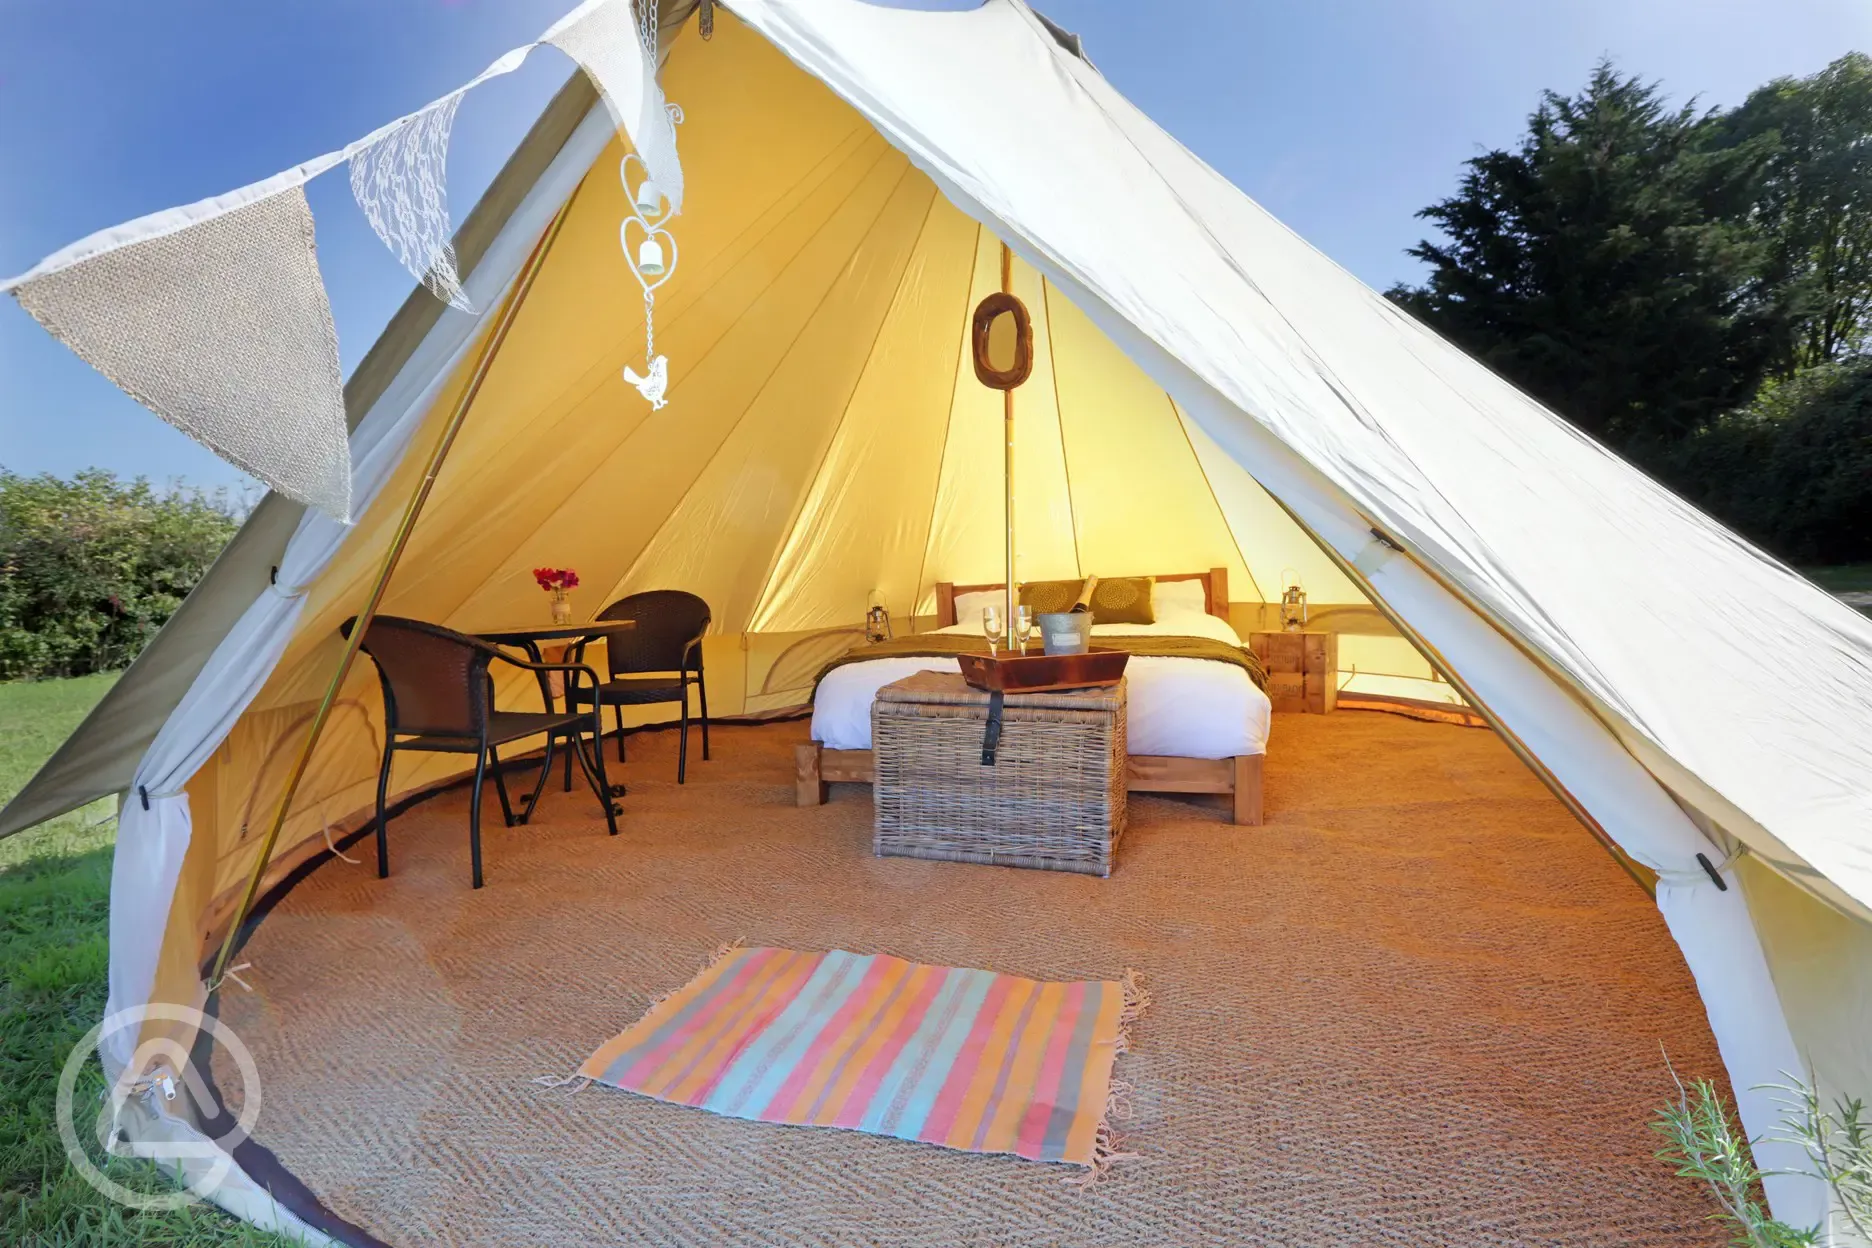 Each of the five 5m bell tents is furnished with a sumptuous king size bed